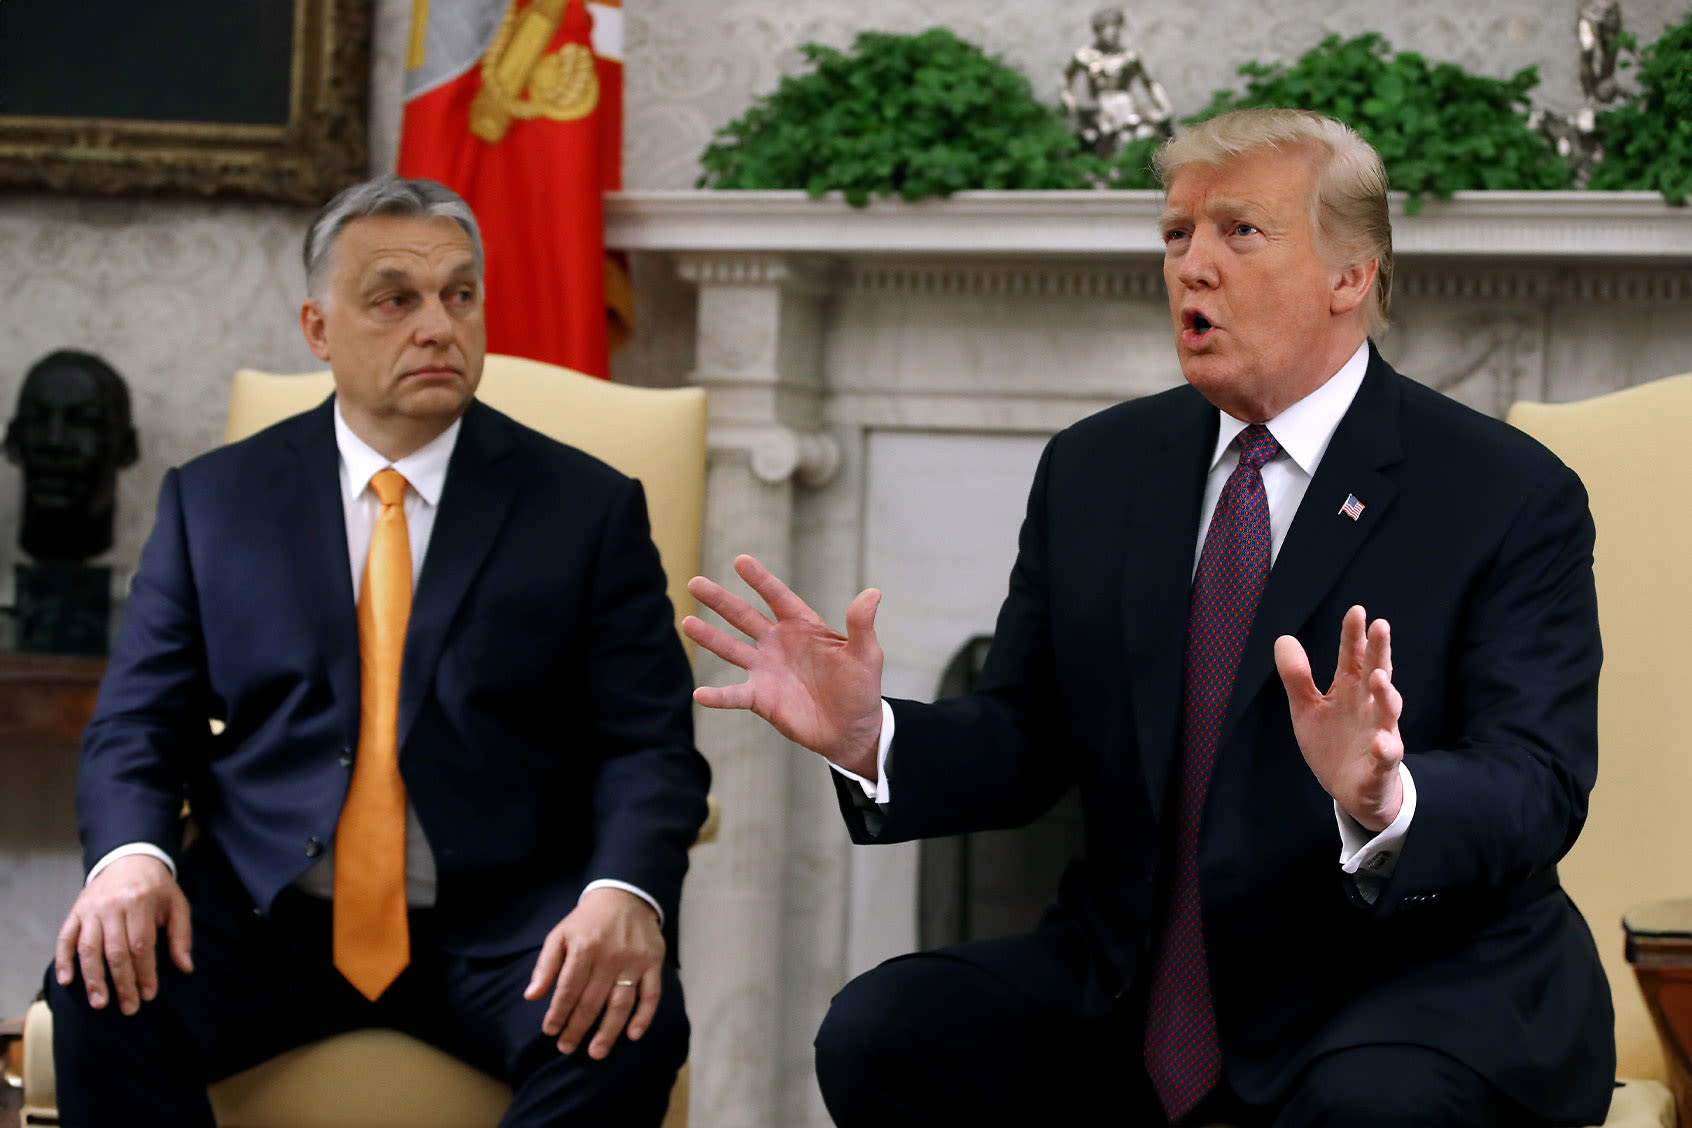 After meeting with Putin in Moscow, Hungary's Orbán brings "peace mission" to Trump at Mar-a-Lago